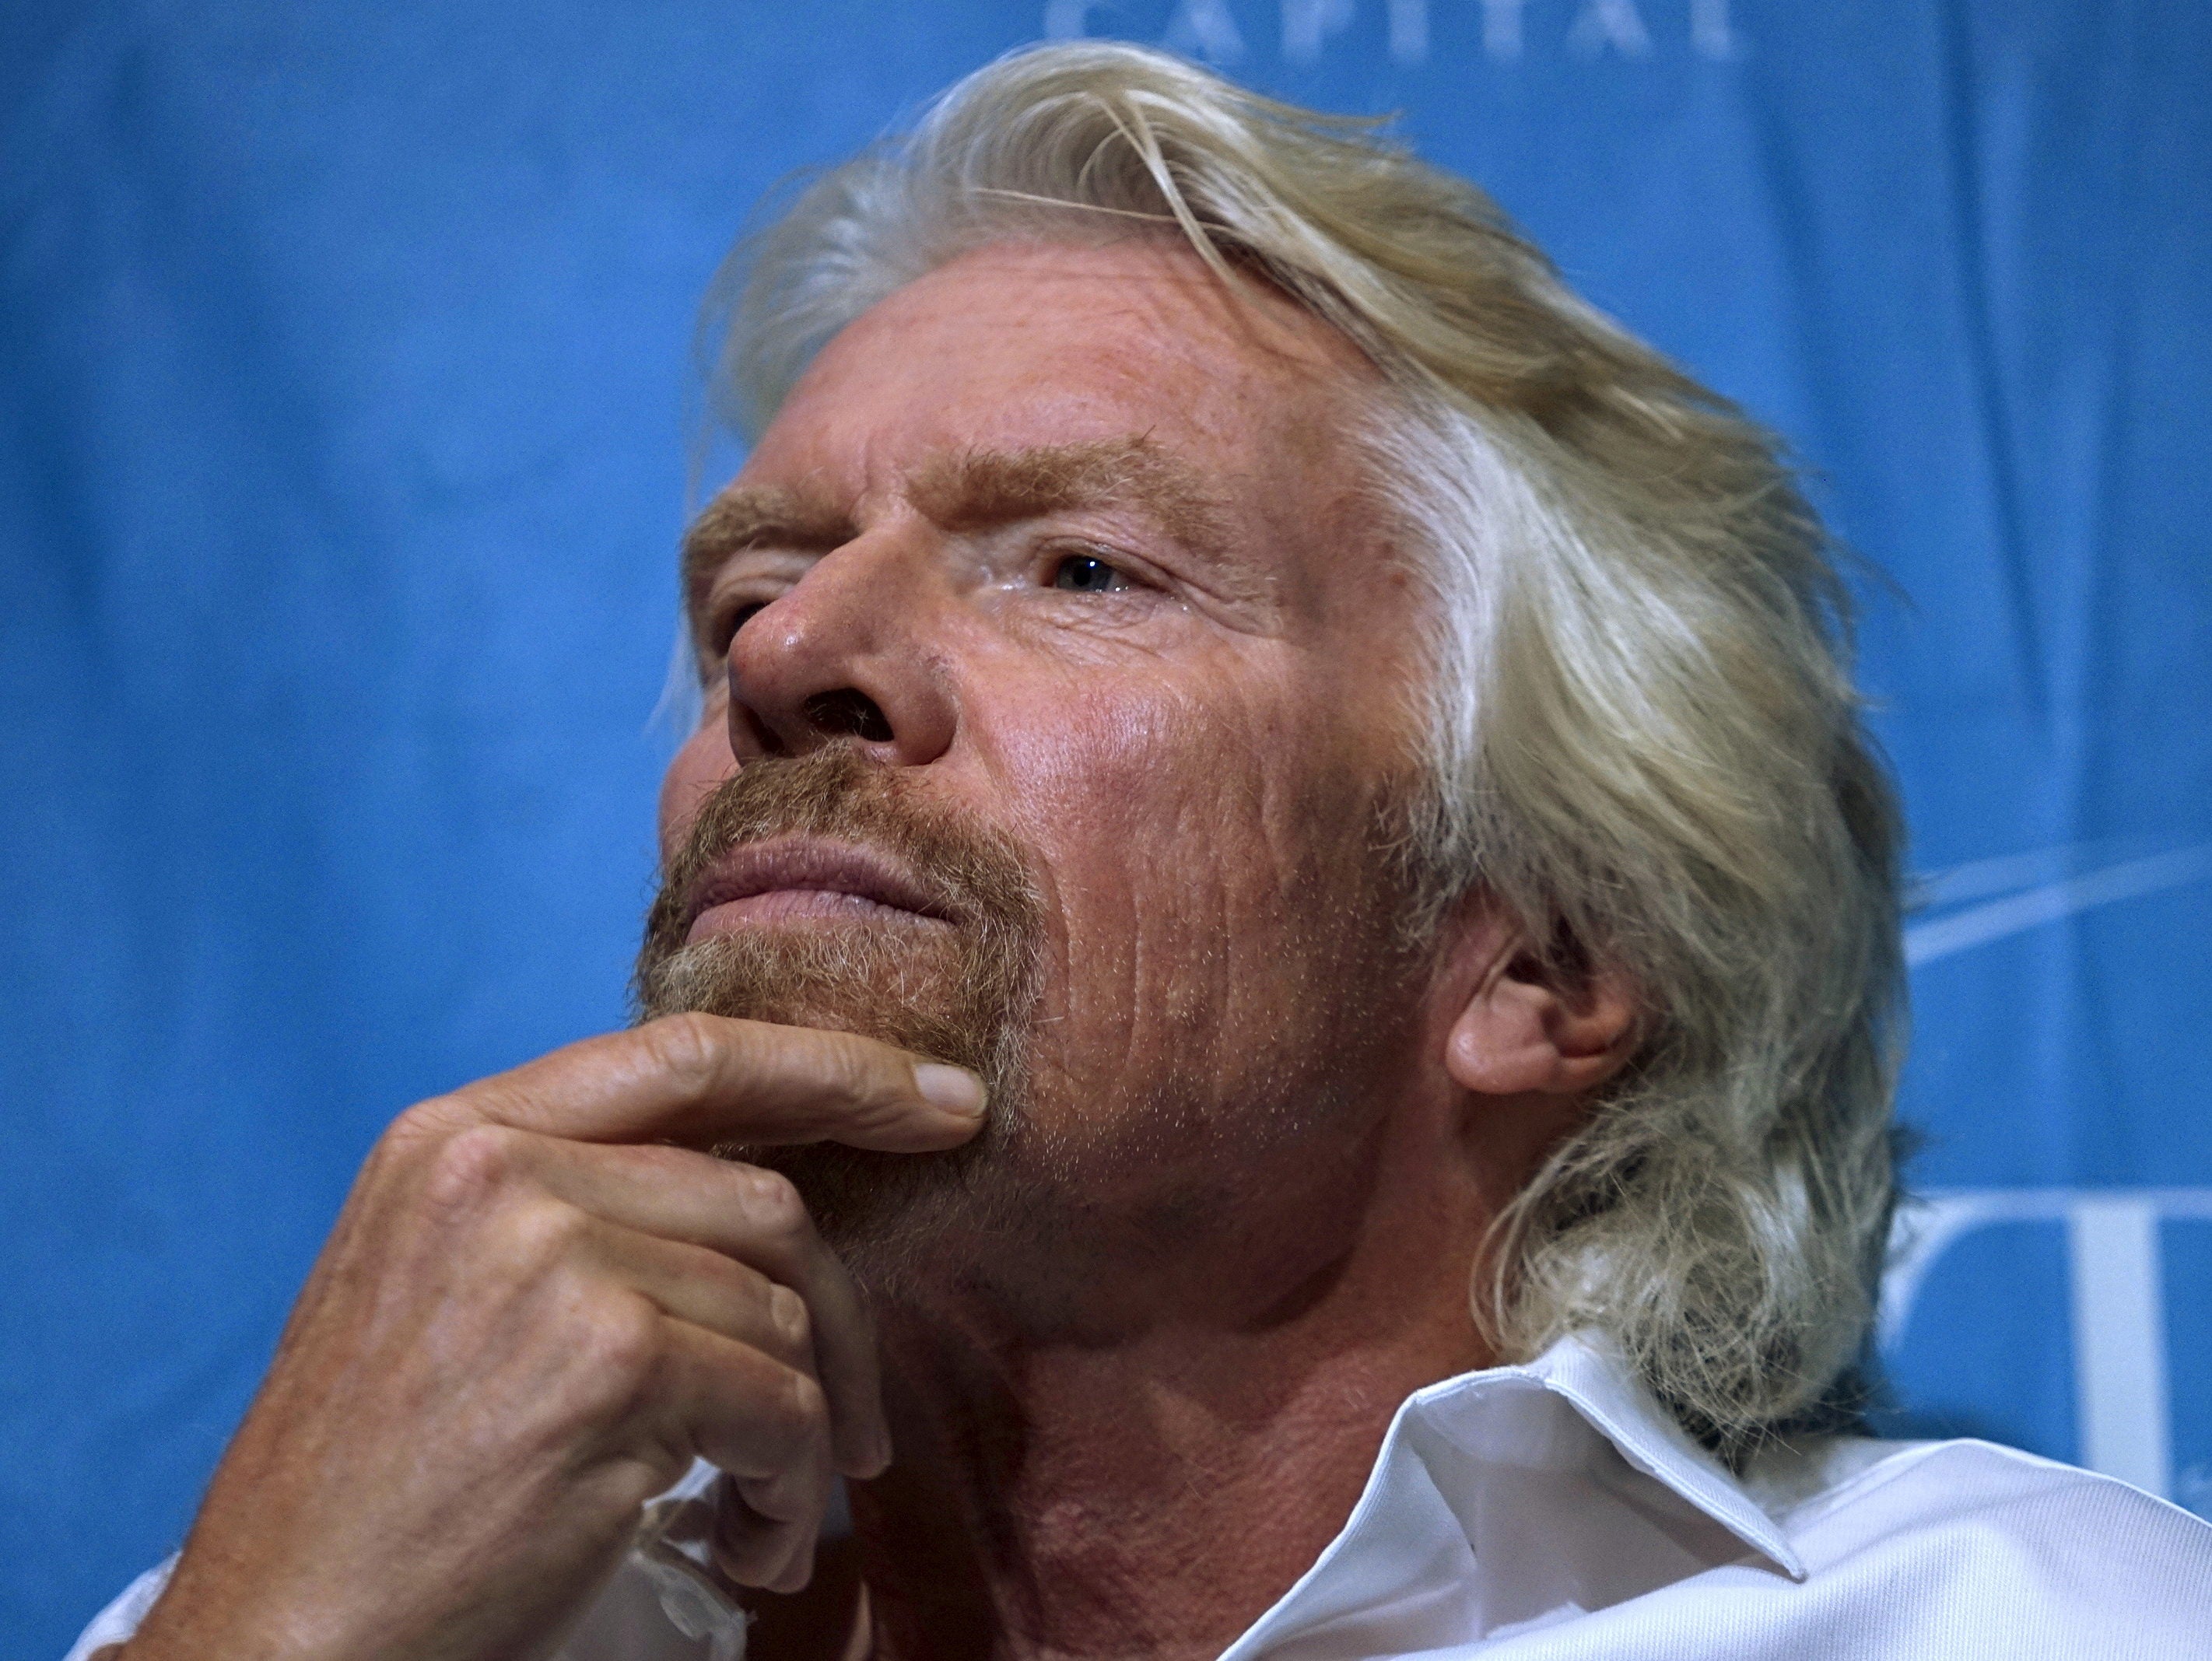 Sir Richard Branson will explore the business of empathy at